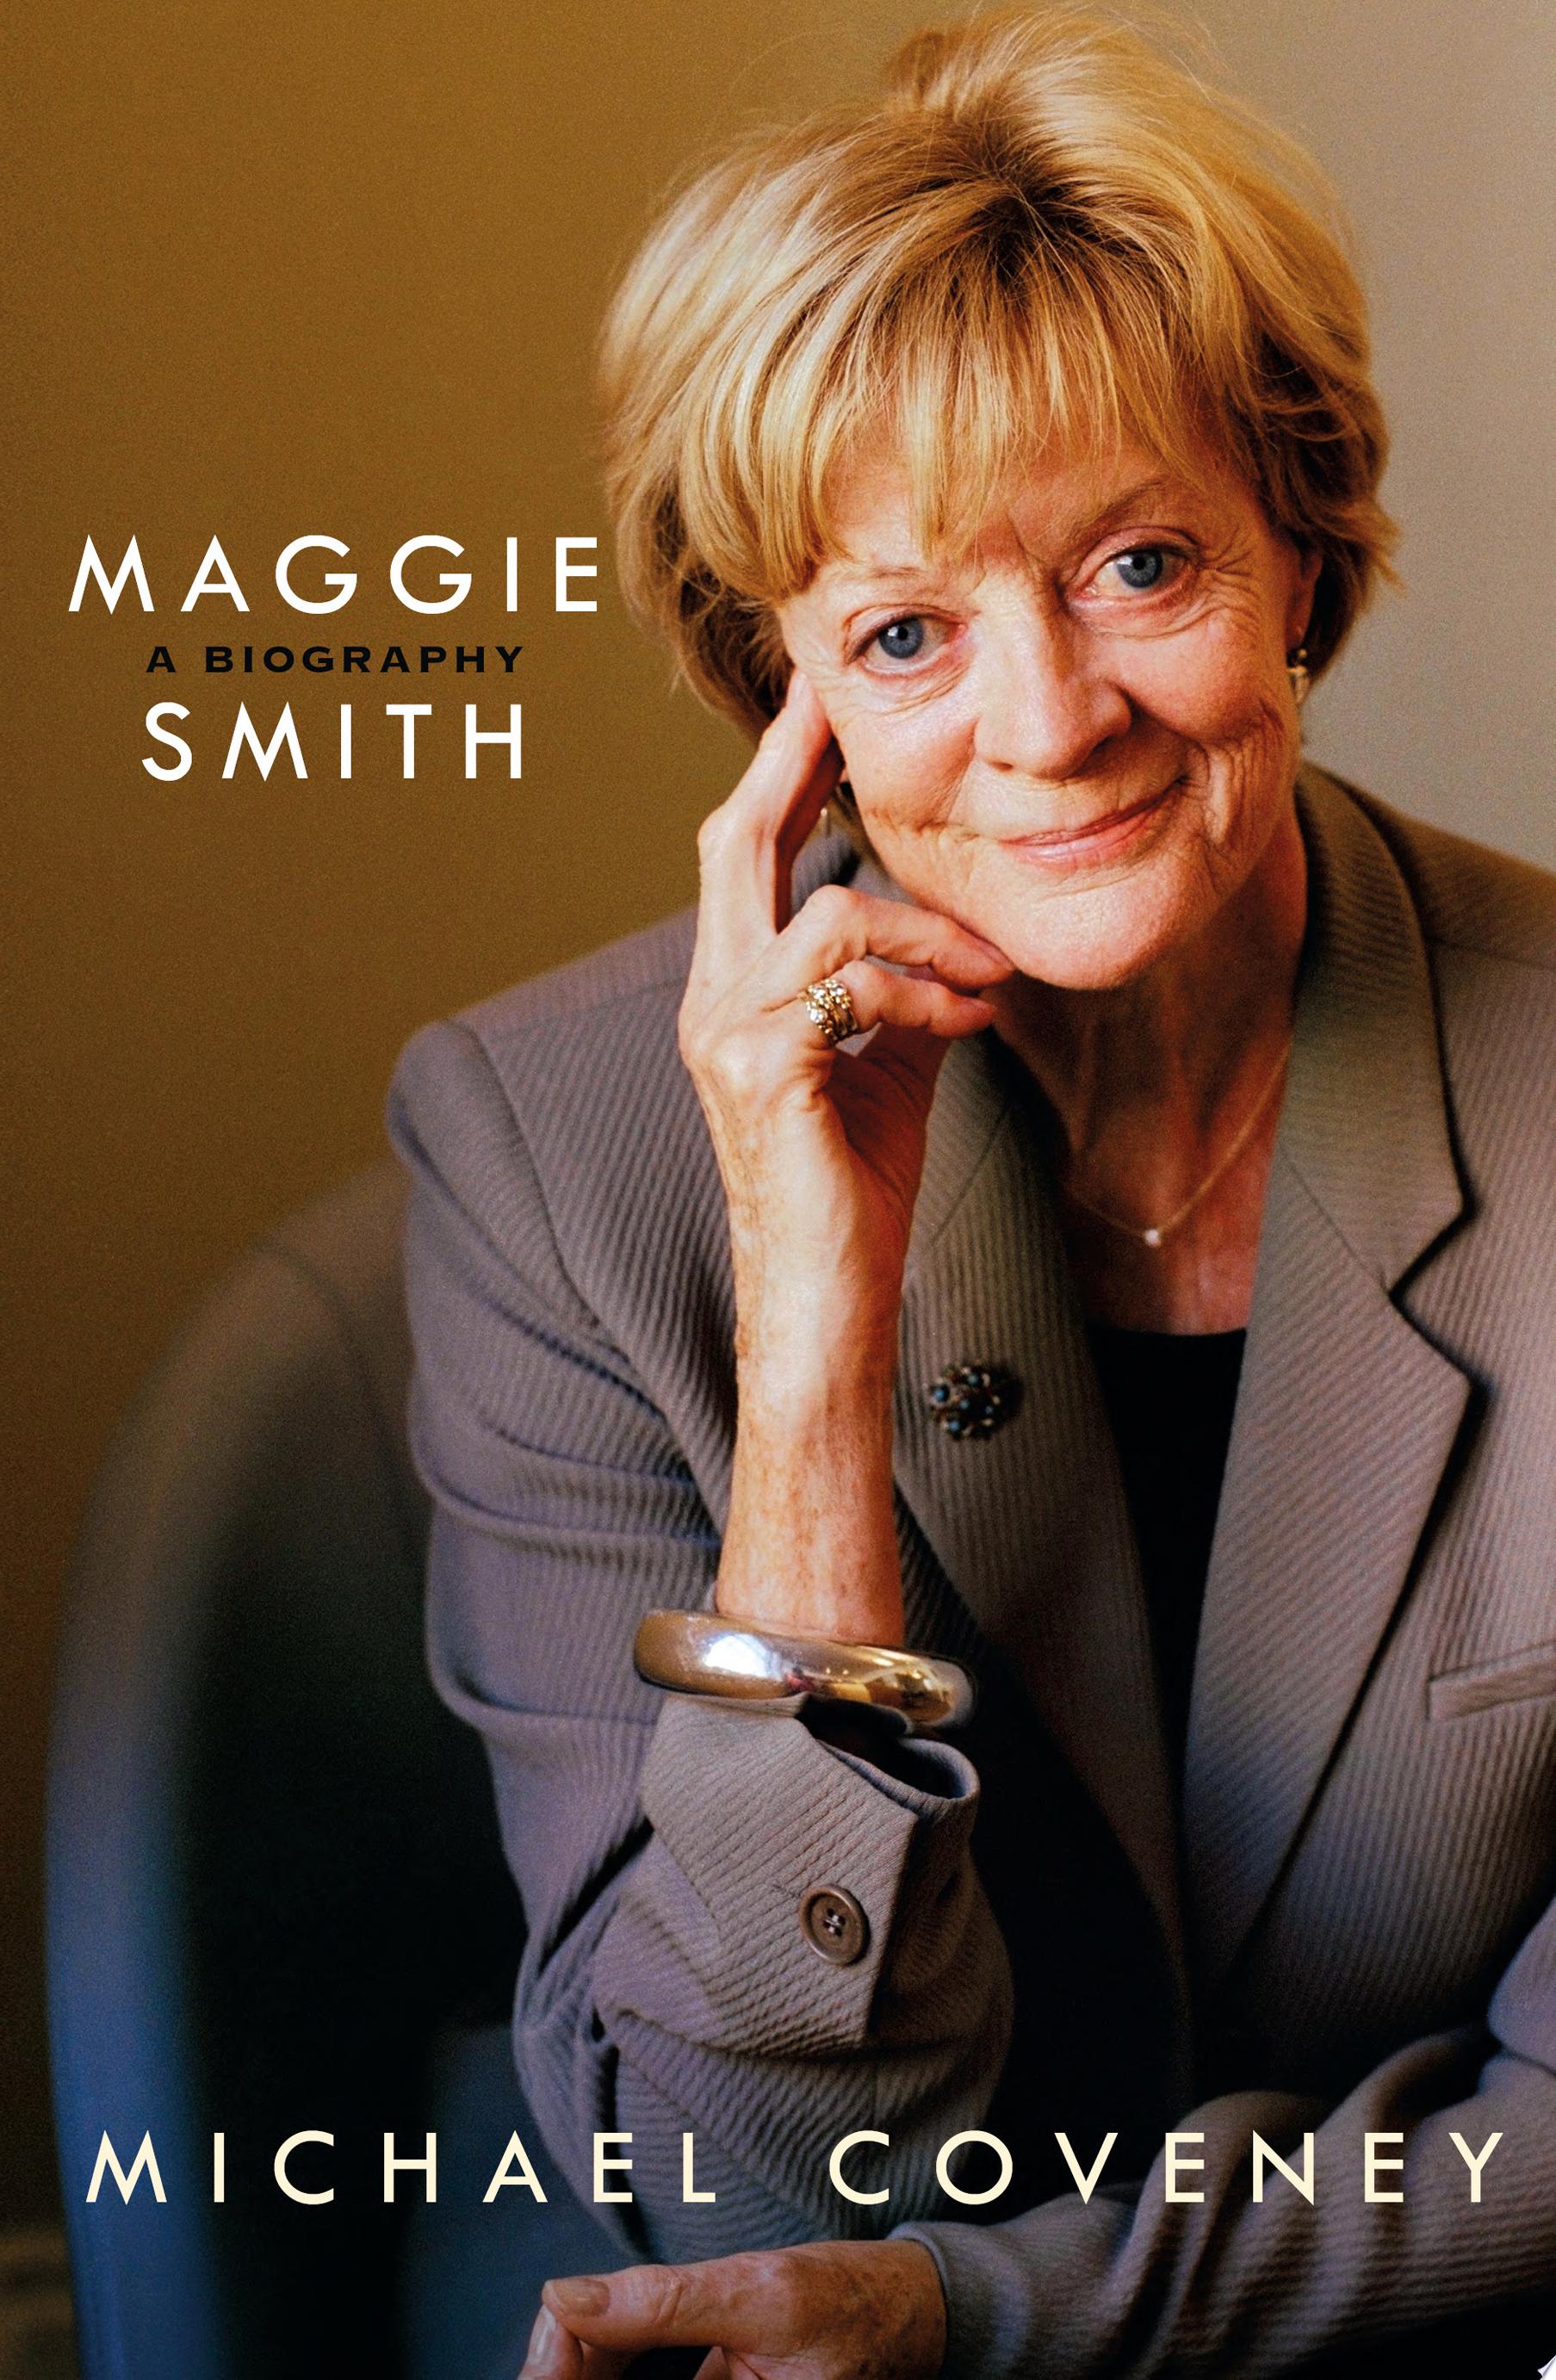 Image for "Maggie Smith"